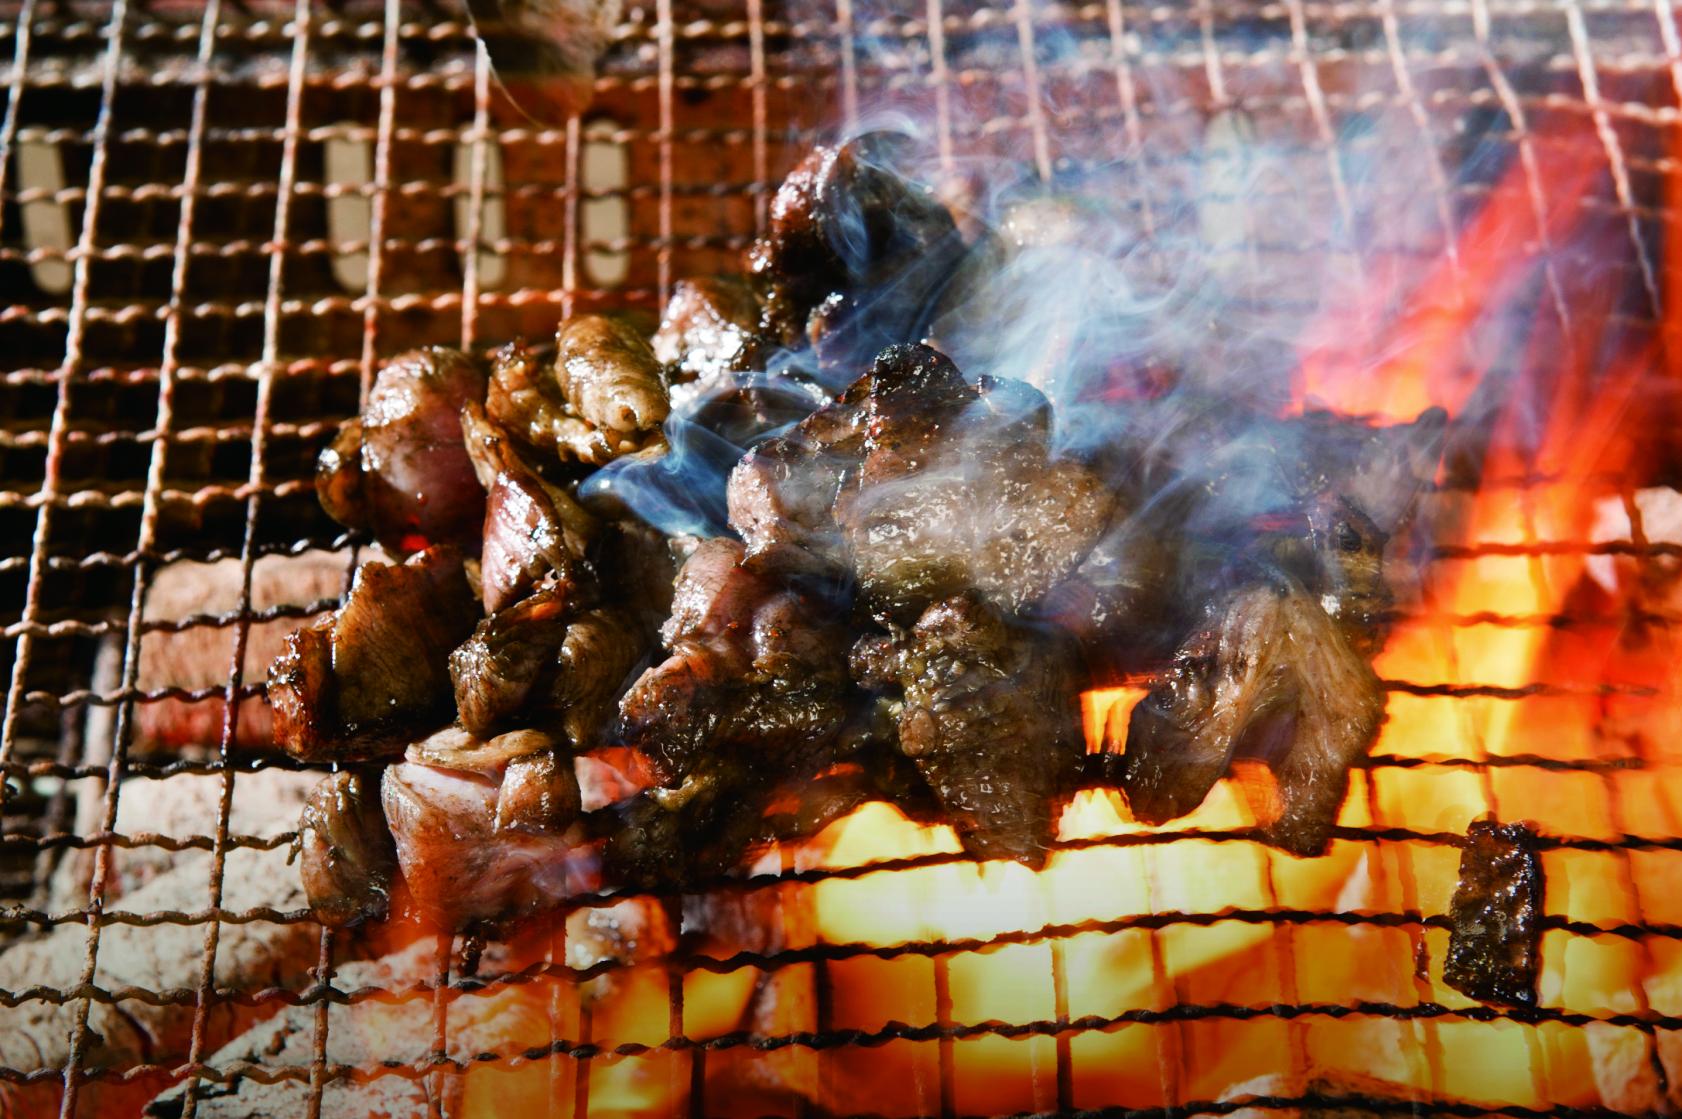 Charcoal Grilled Miyazaki Chicken to Whet Your Appetite